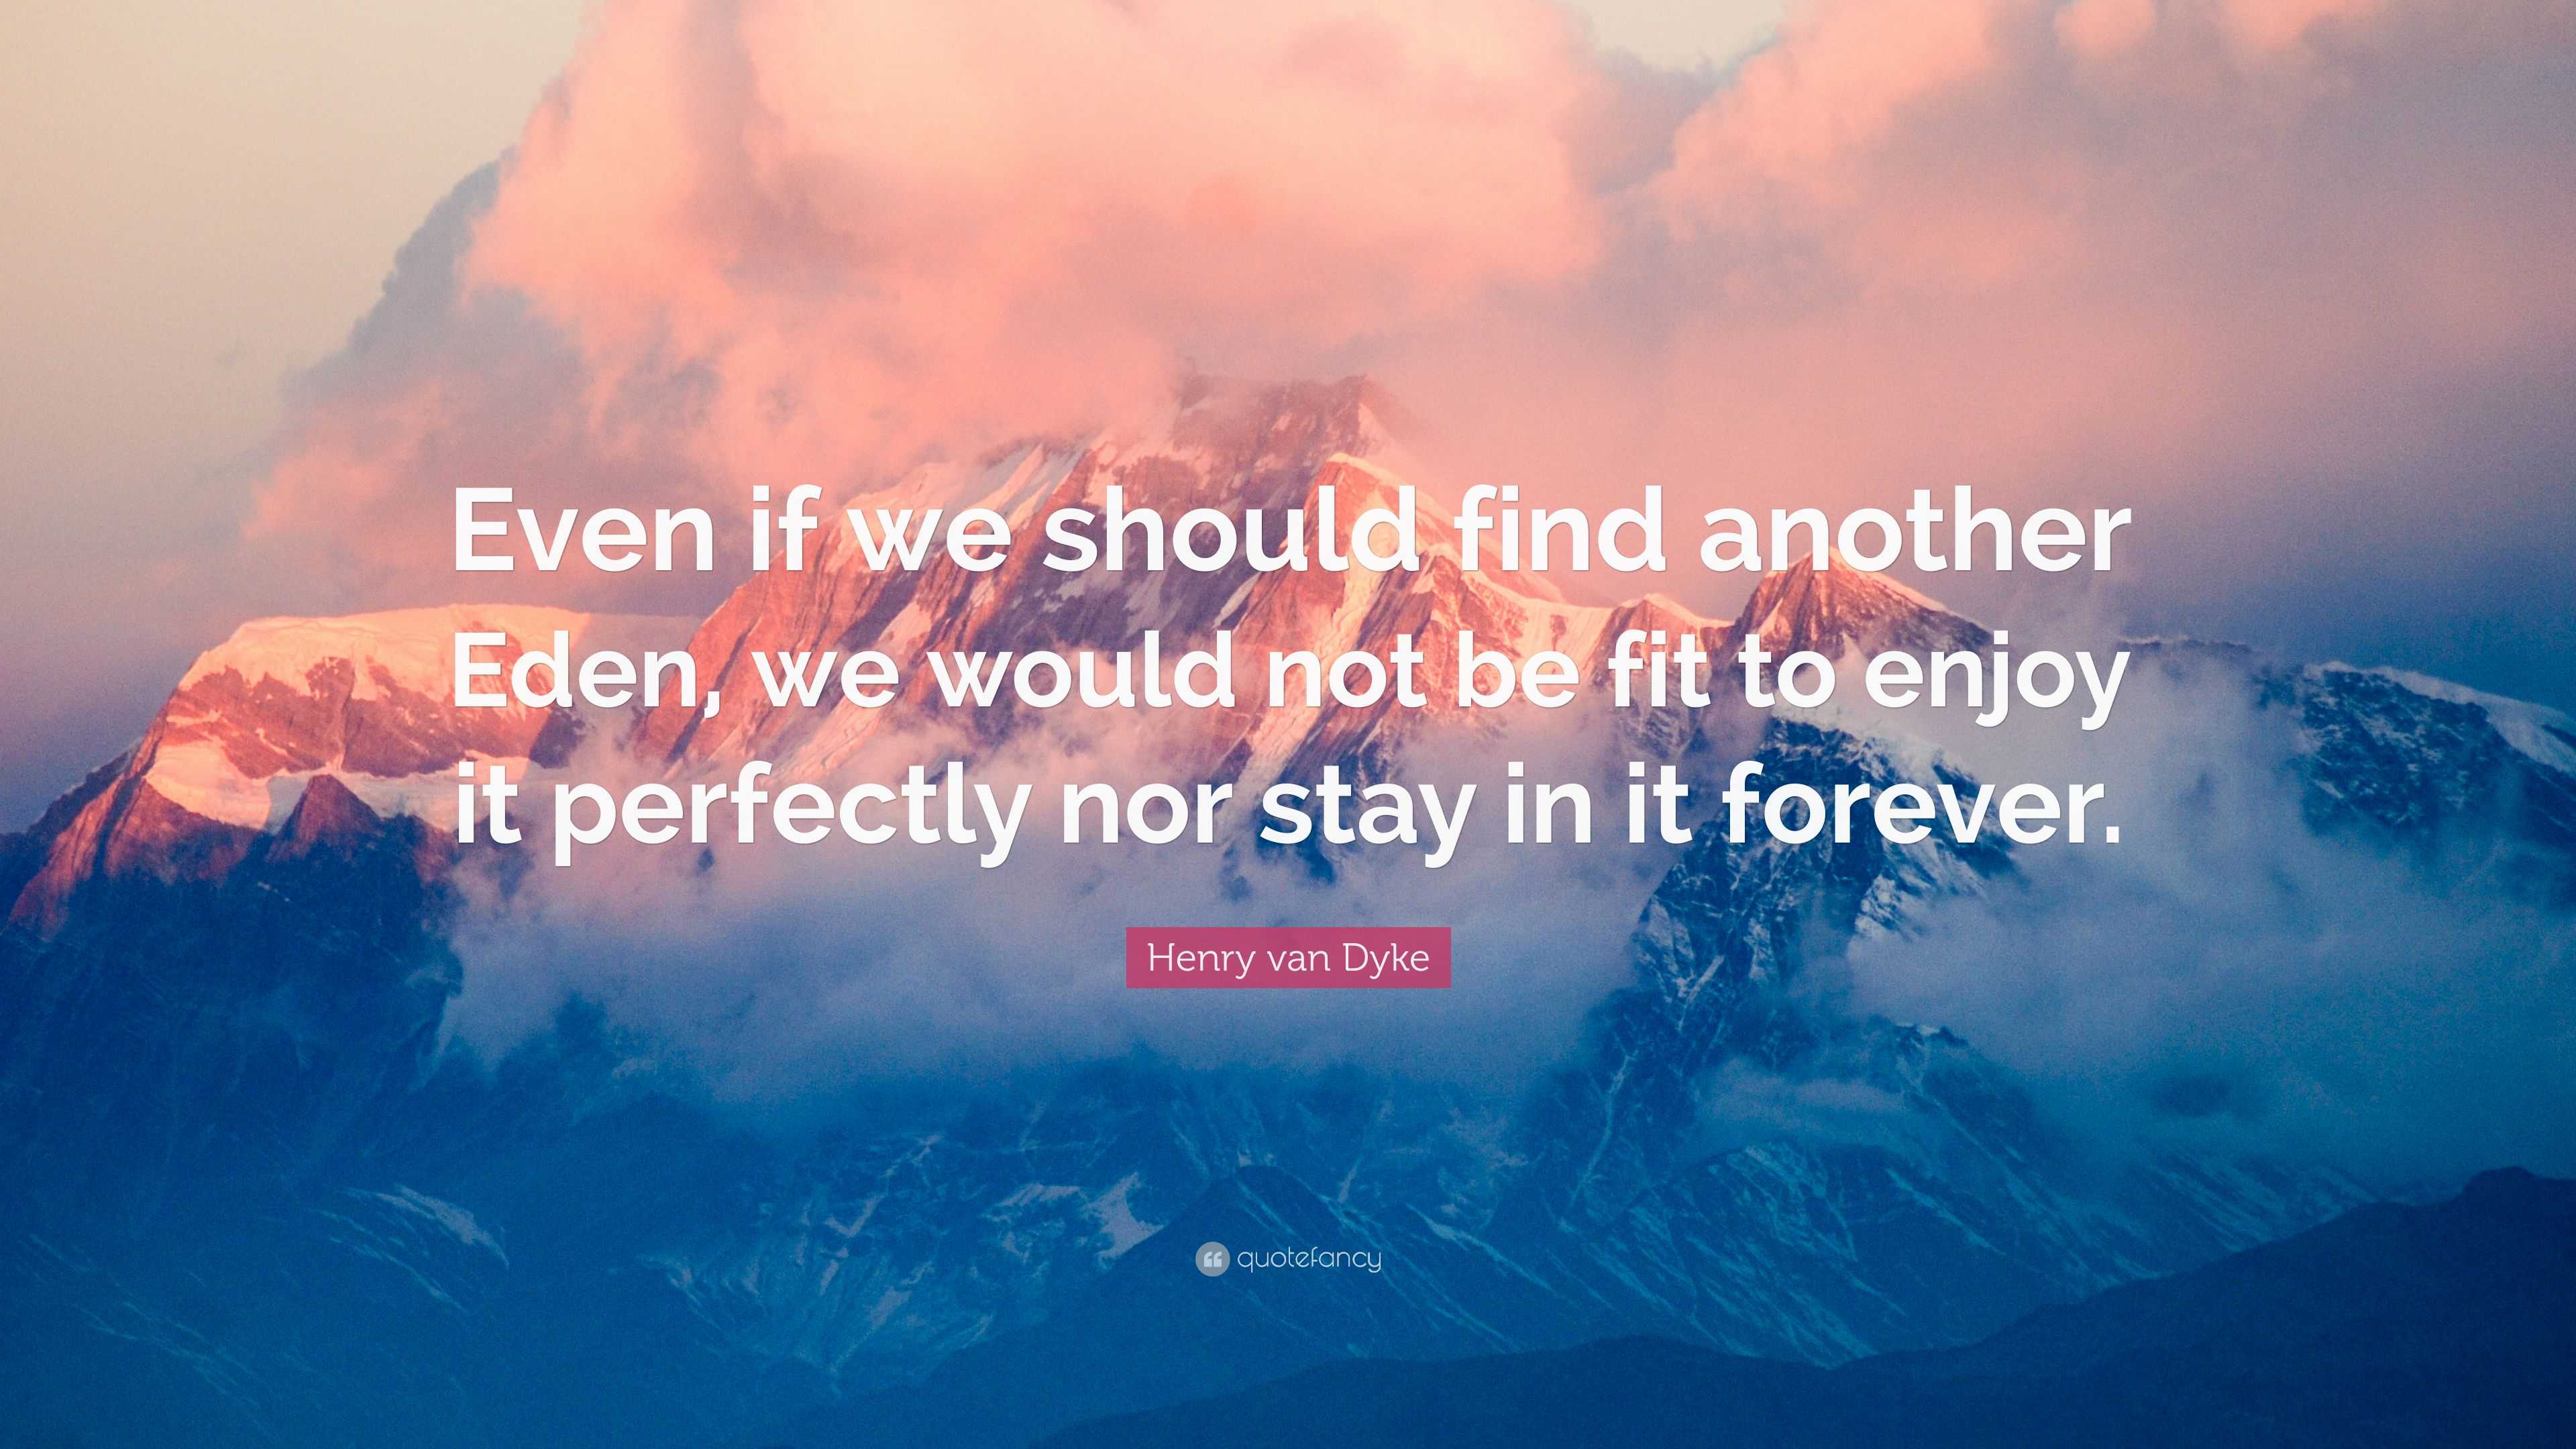 Henry van Dyke Quote: “Even if we should find another Eden, we would ...